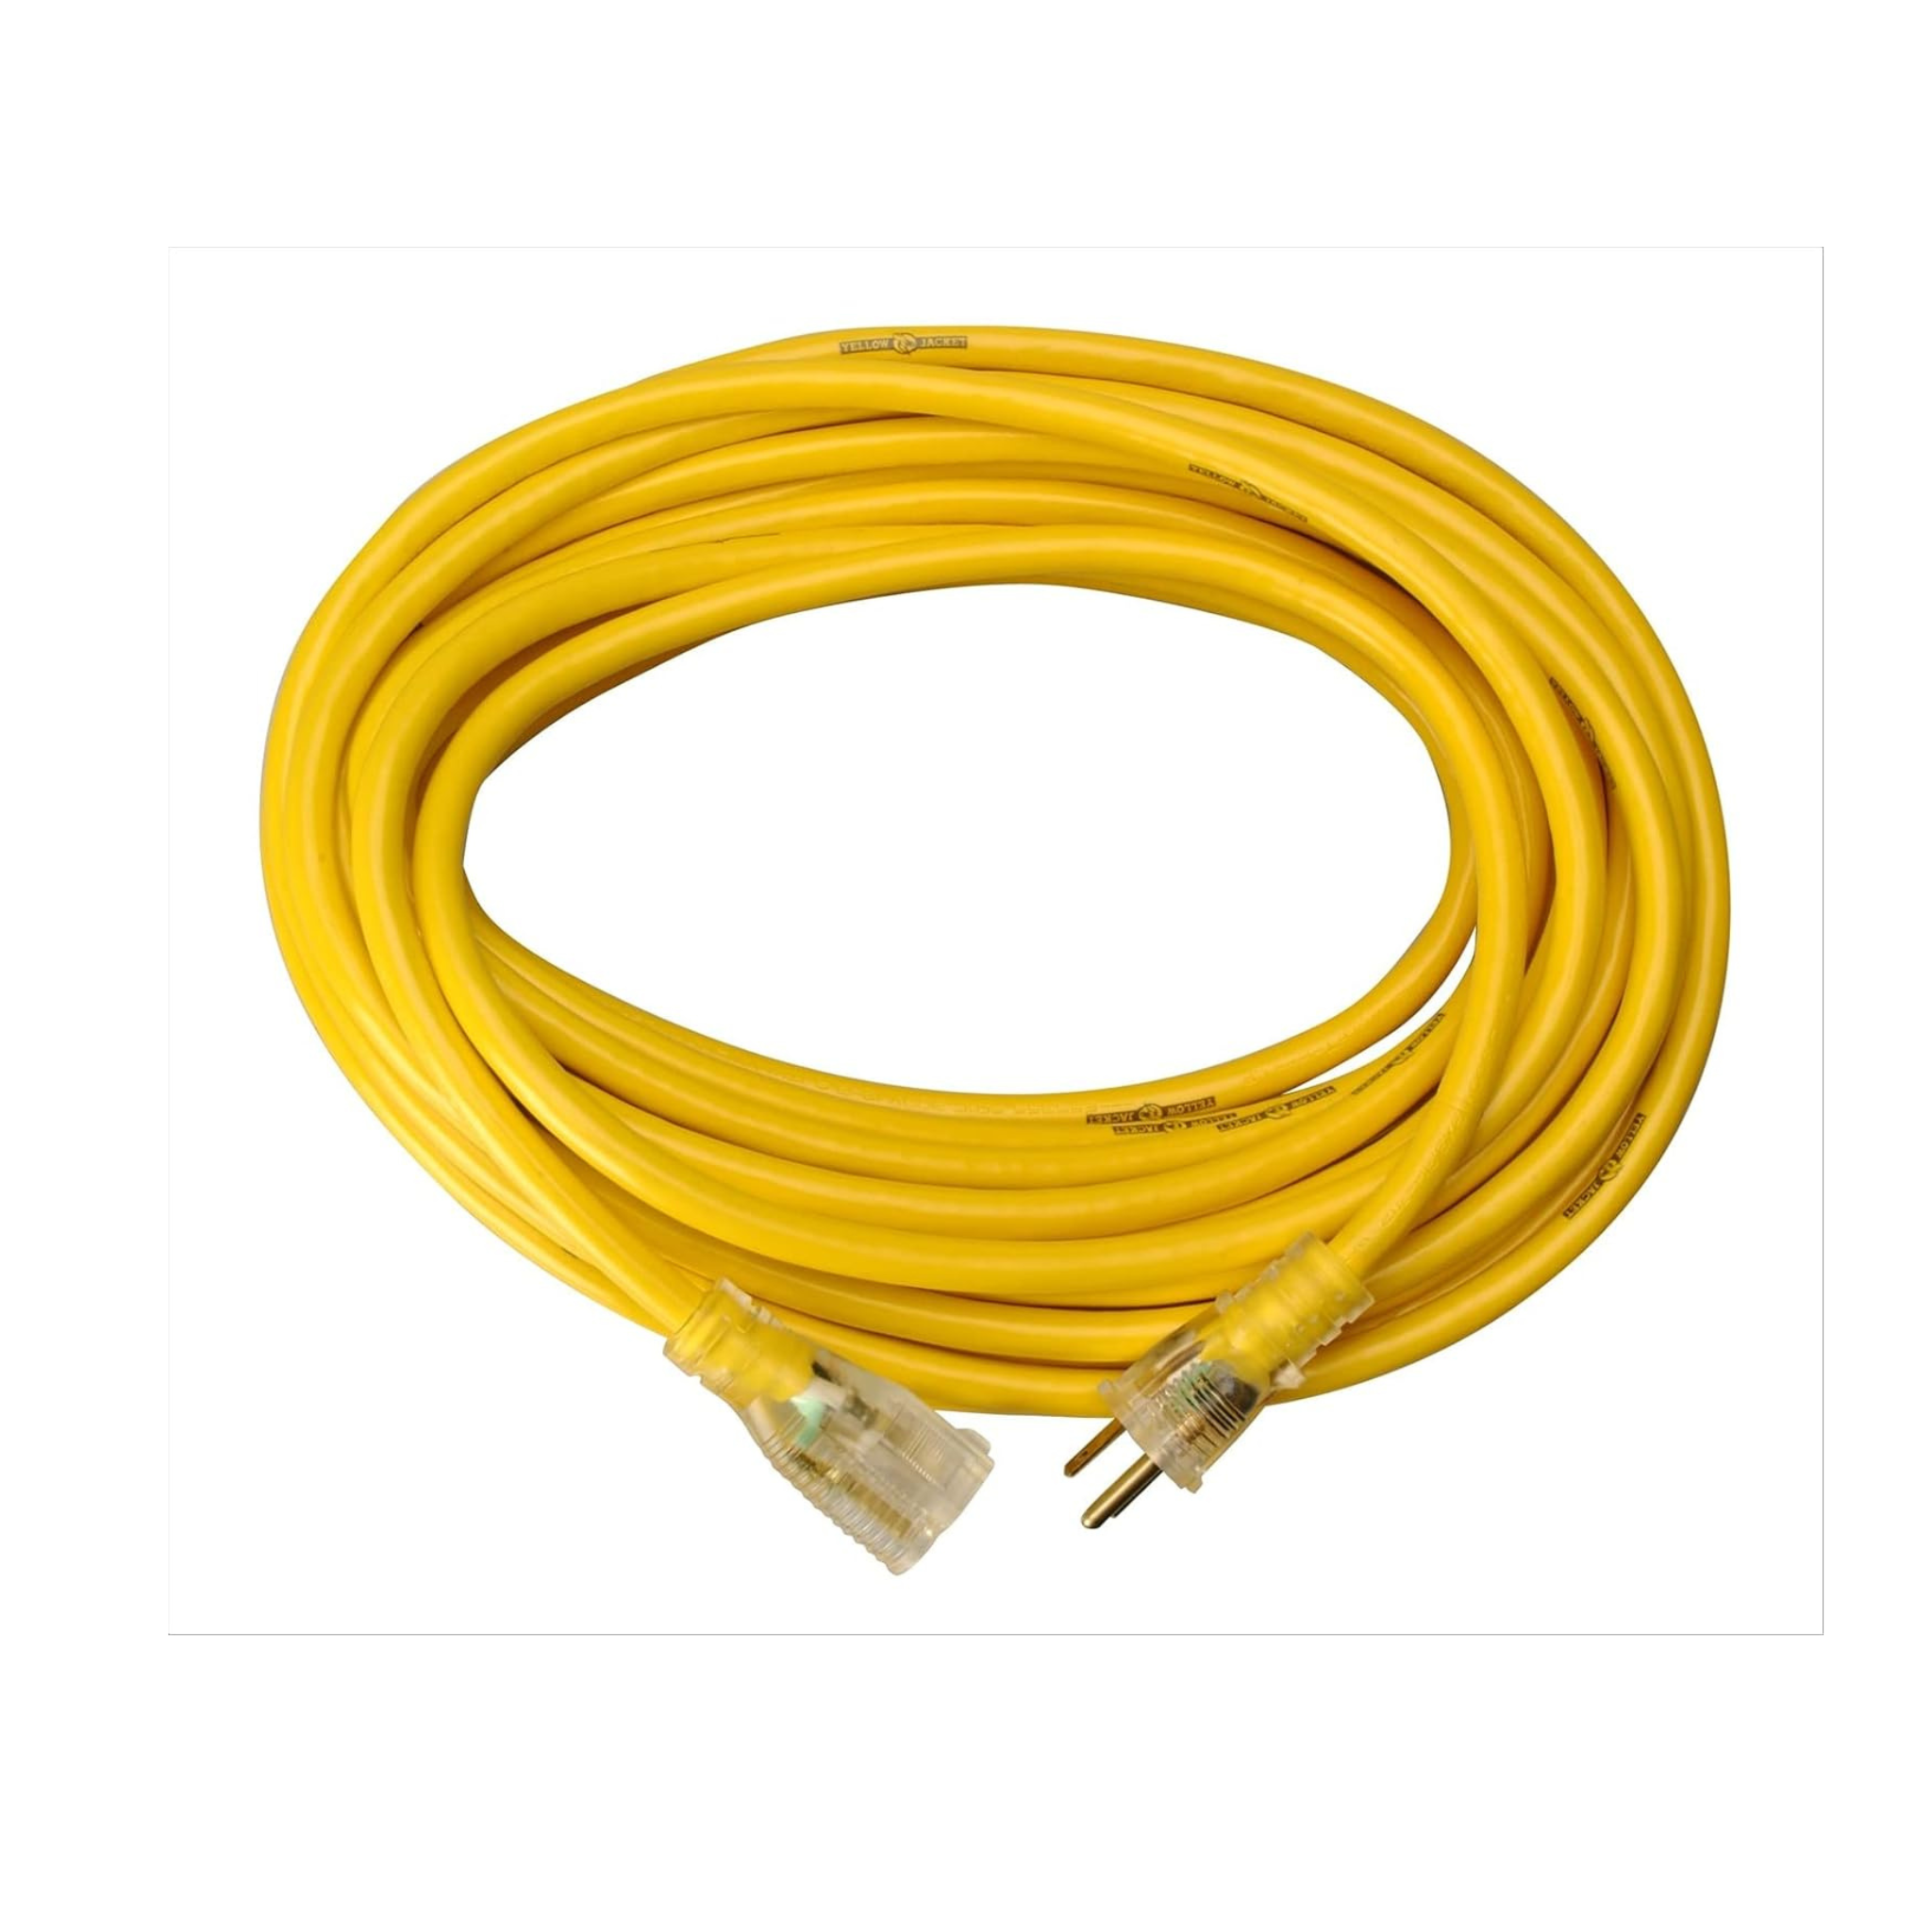 25' Yellow Jacket 12/3 Heavy-Duty 15-Amp SJTW Extension Cord w/ Lighted Ends